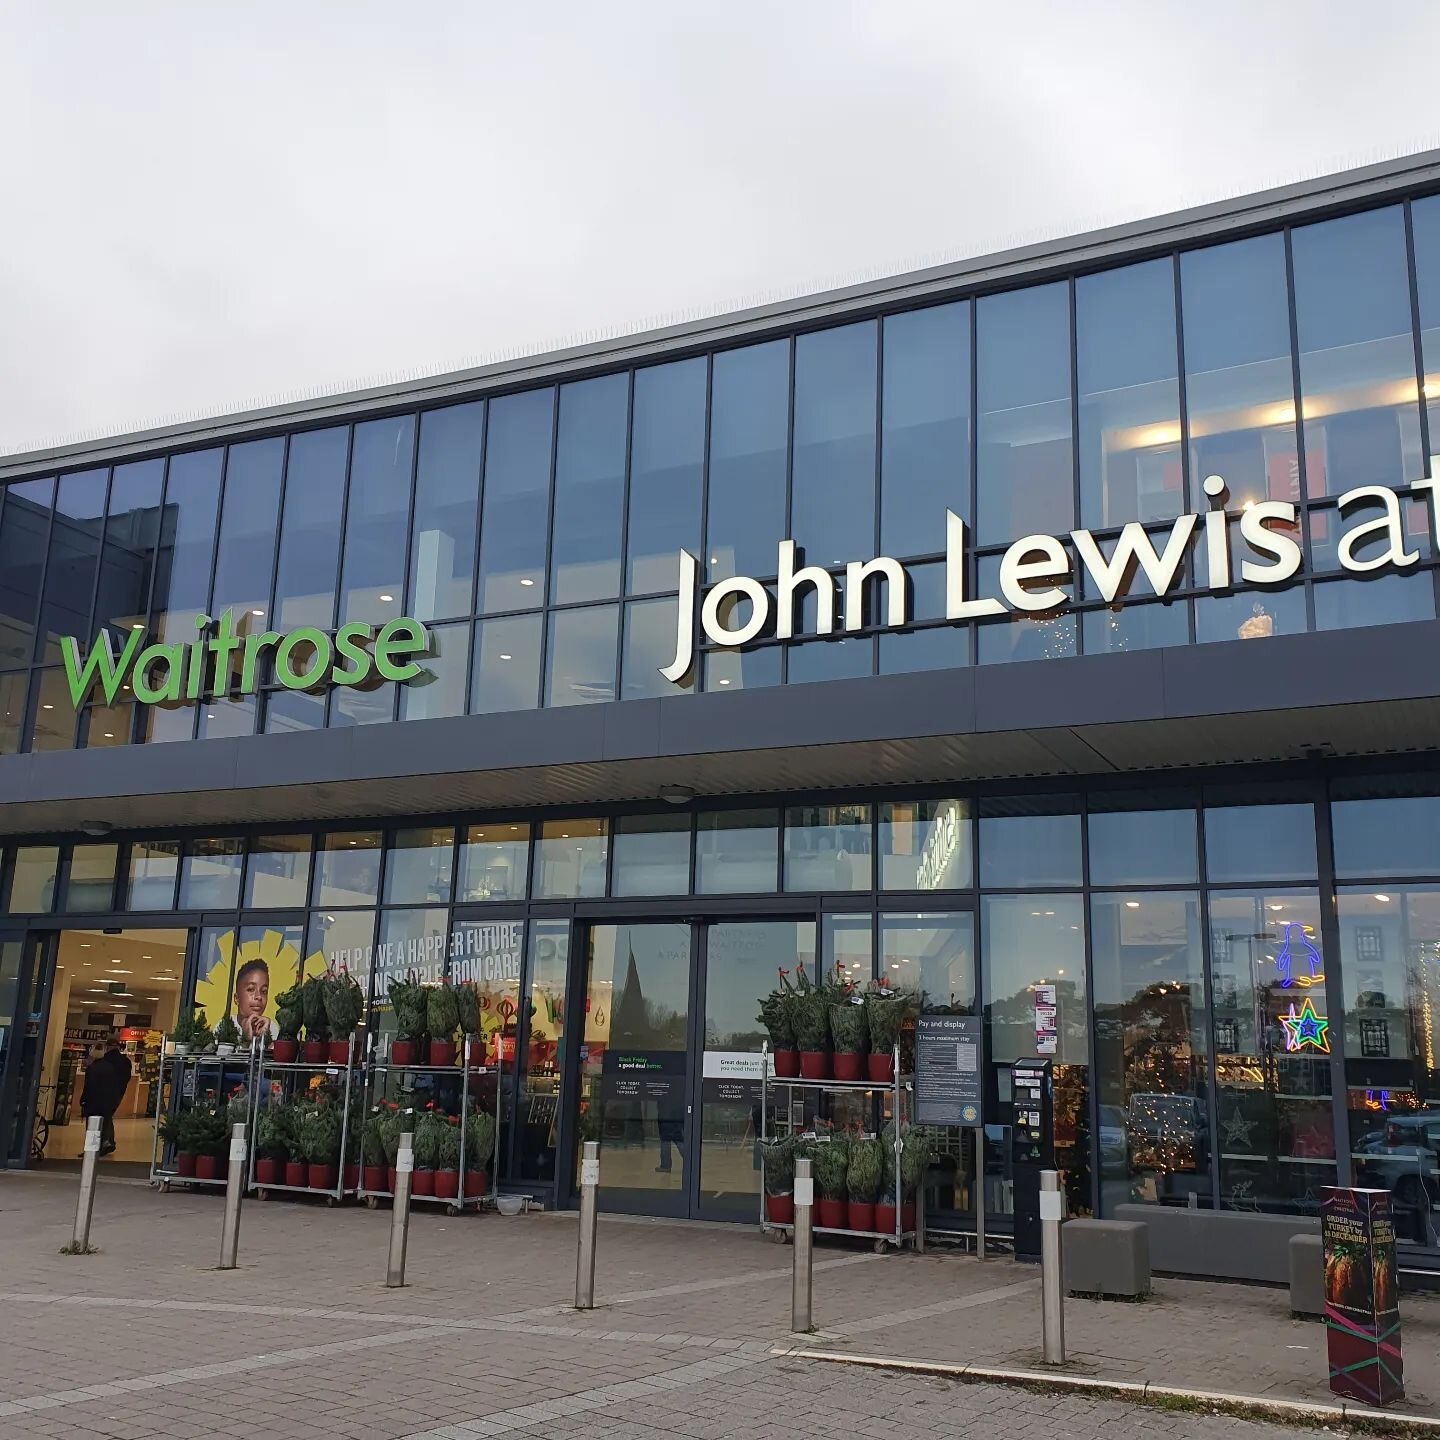 Come on down to John Lewis &amp; Waitrose this afternoon at 11.30am to hear the Singergy Horsham choir performing some Christmassy numbers!